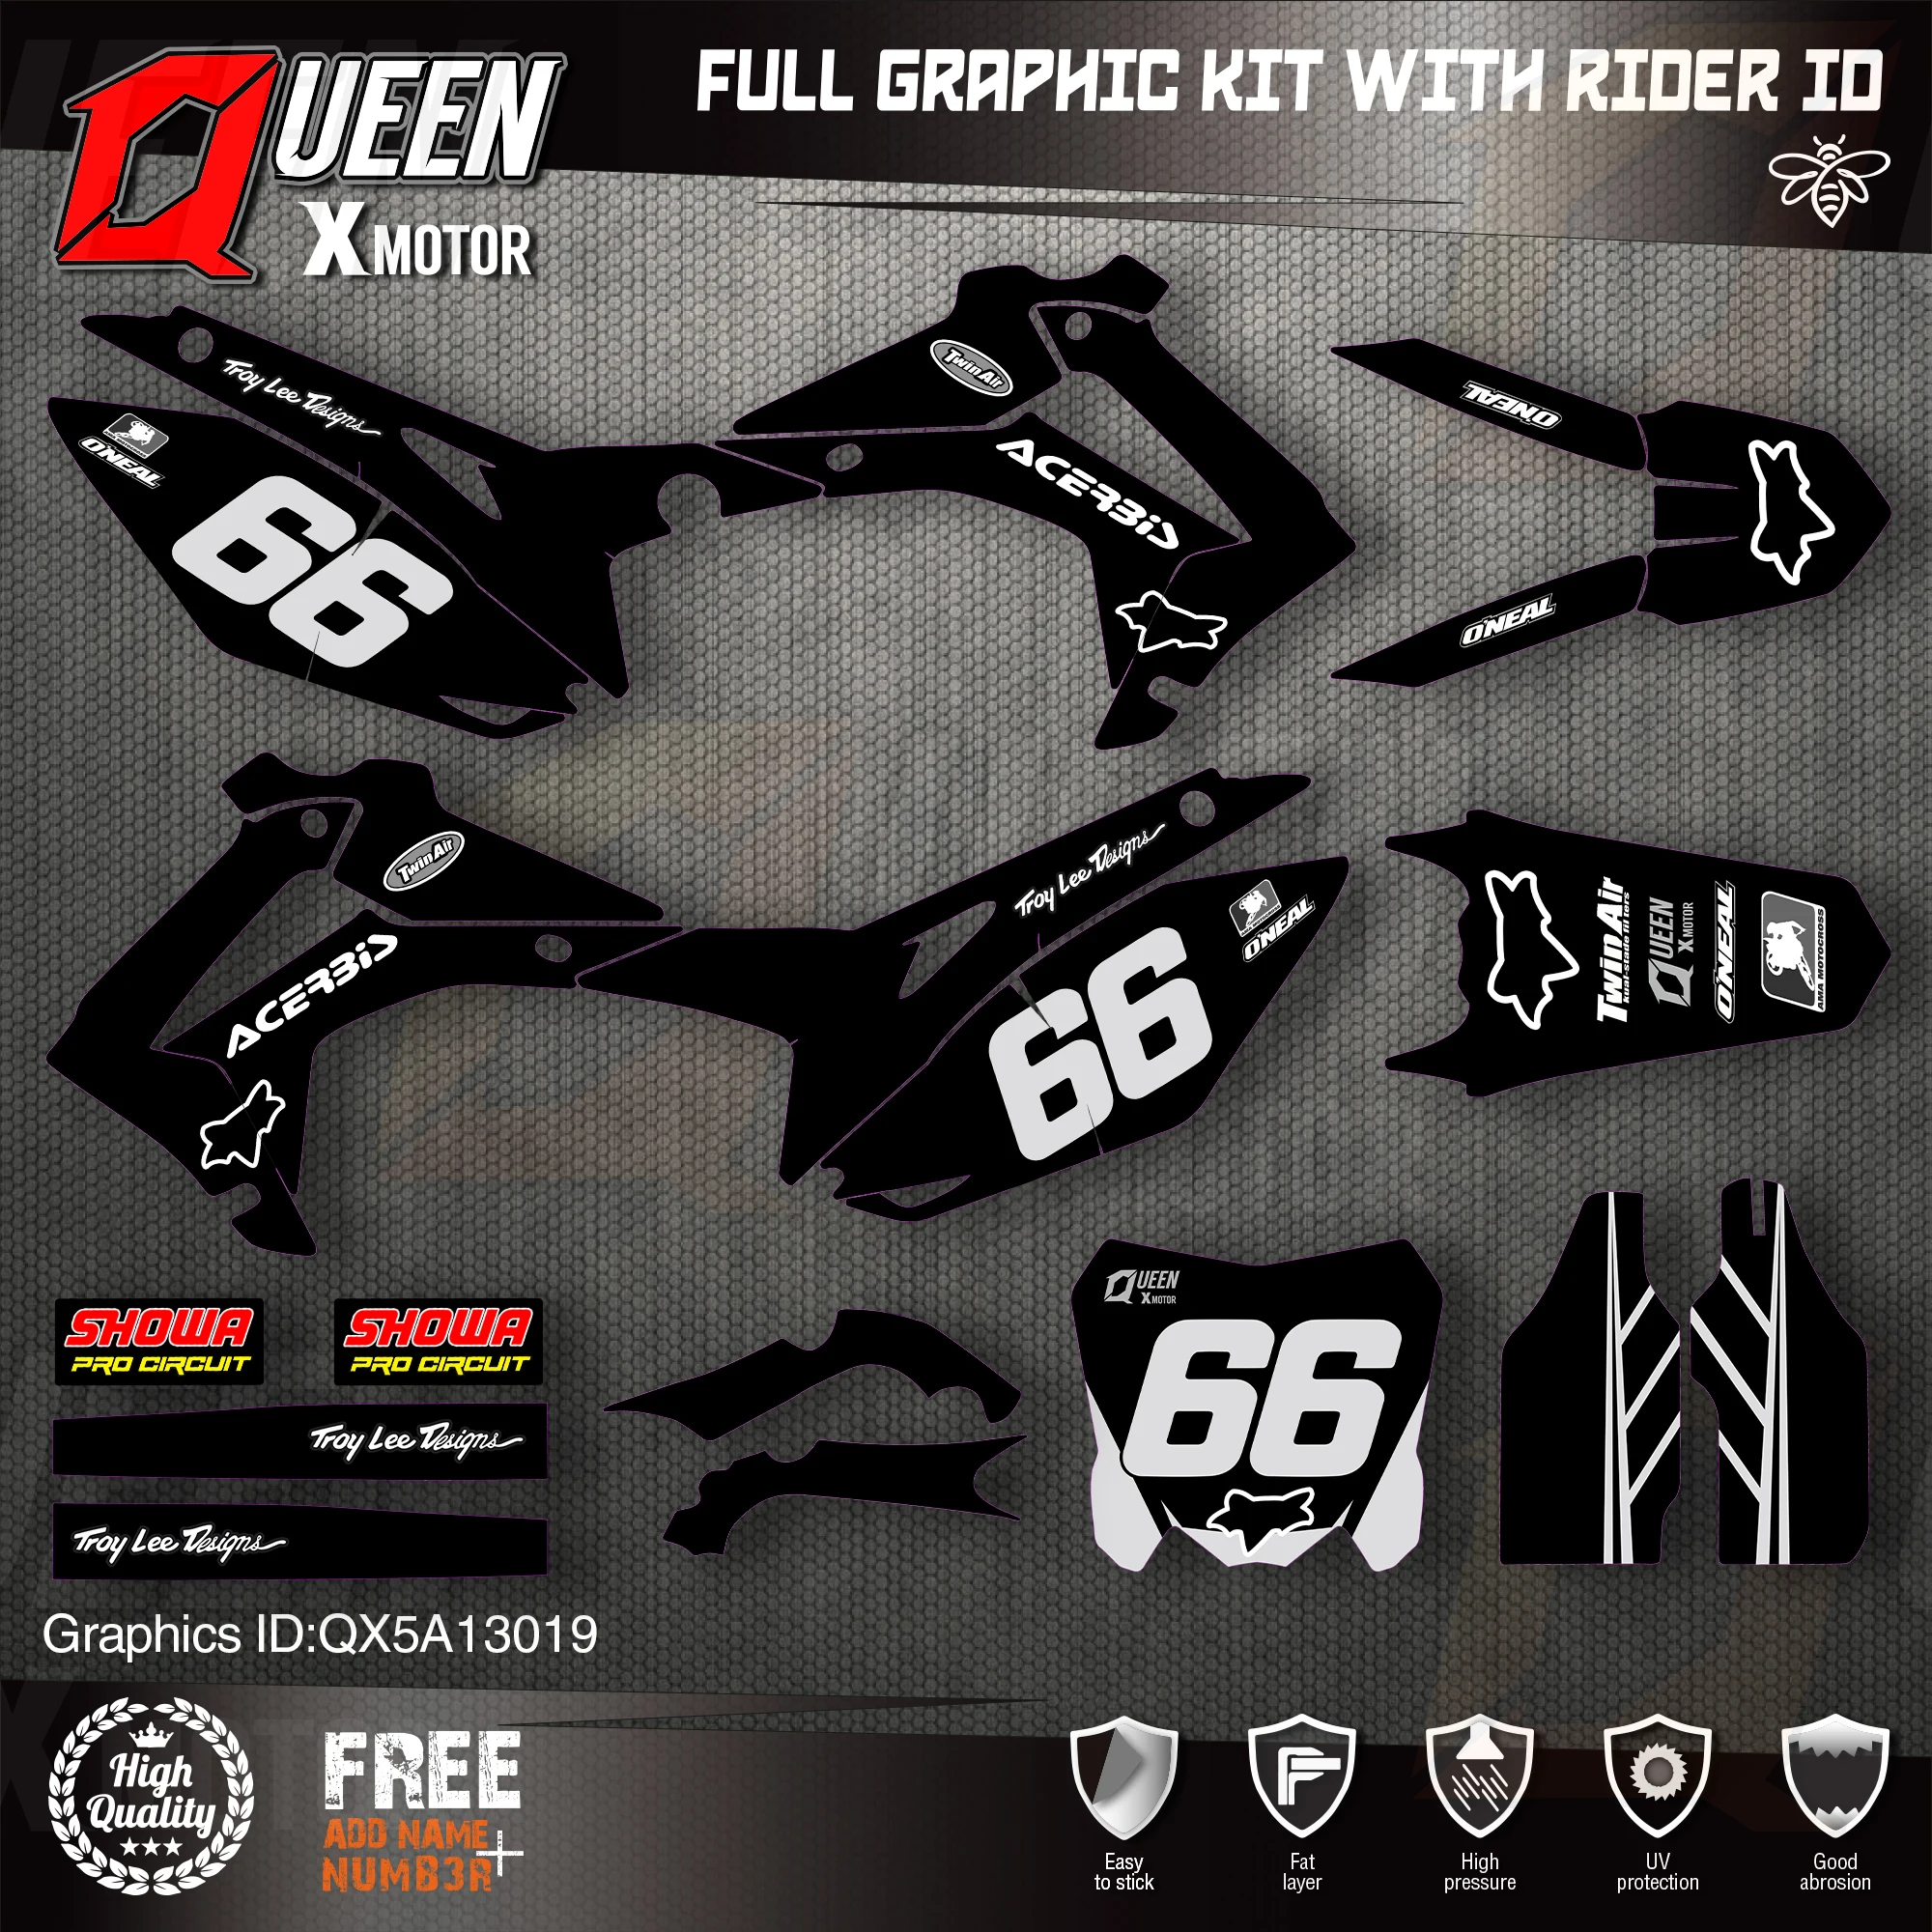 

QUEEN X MOTOR Custom Team Graphics Backgrounds Decals Stickers Kit For HONDA 2014-2017 CRF250R 2013-2016 CRF450R 019